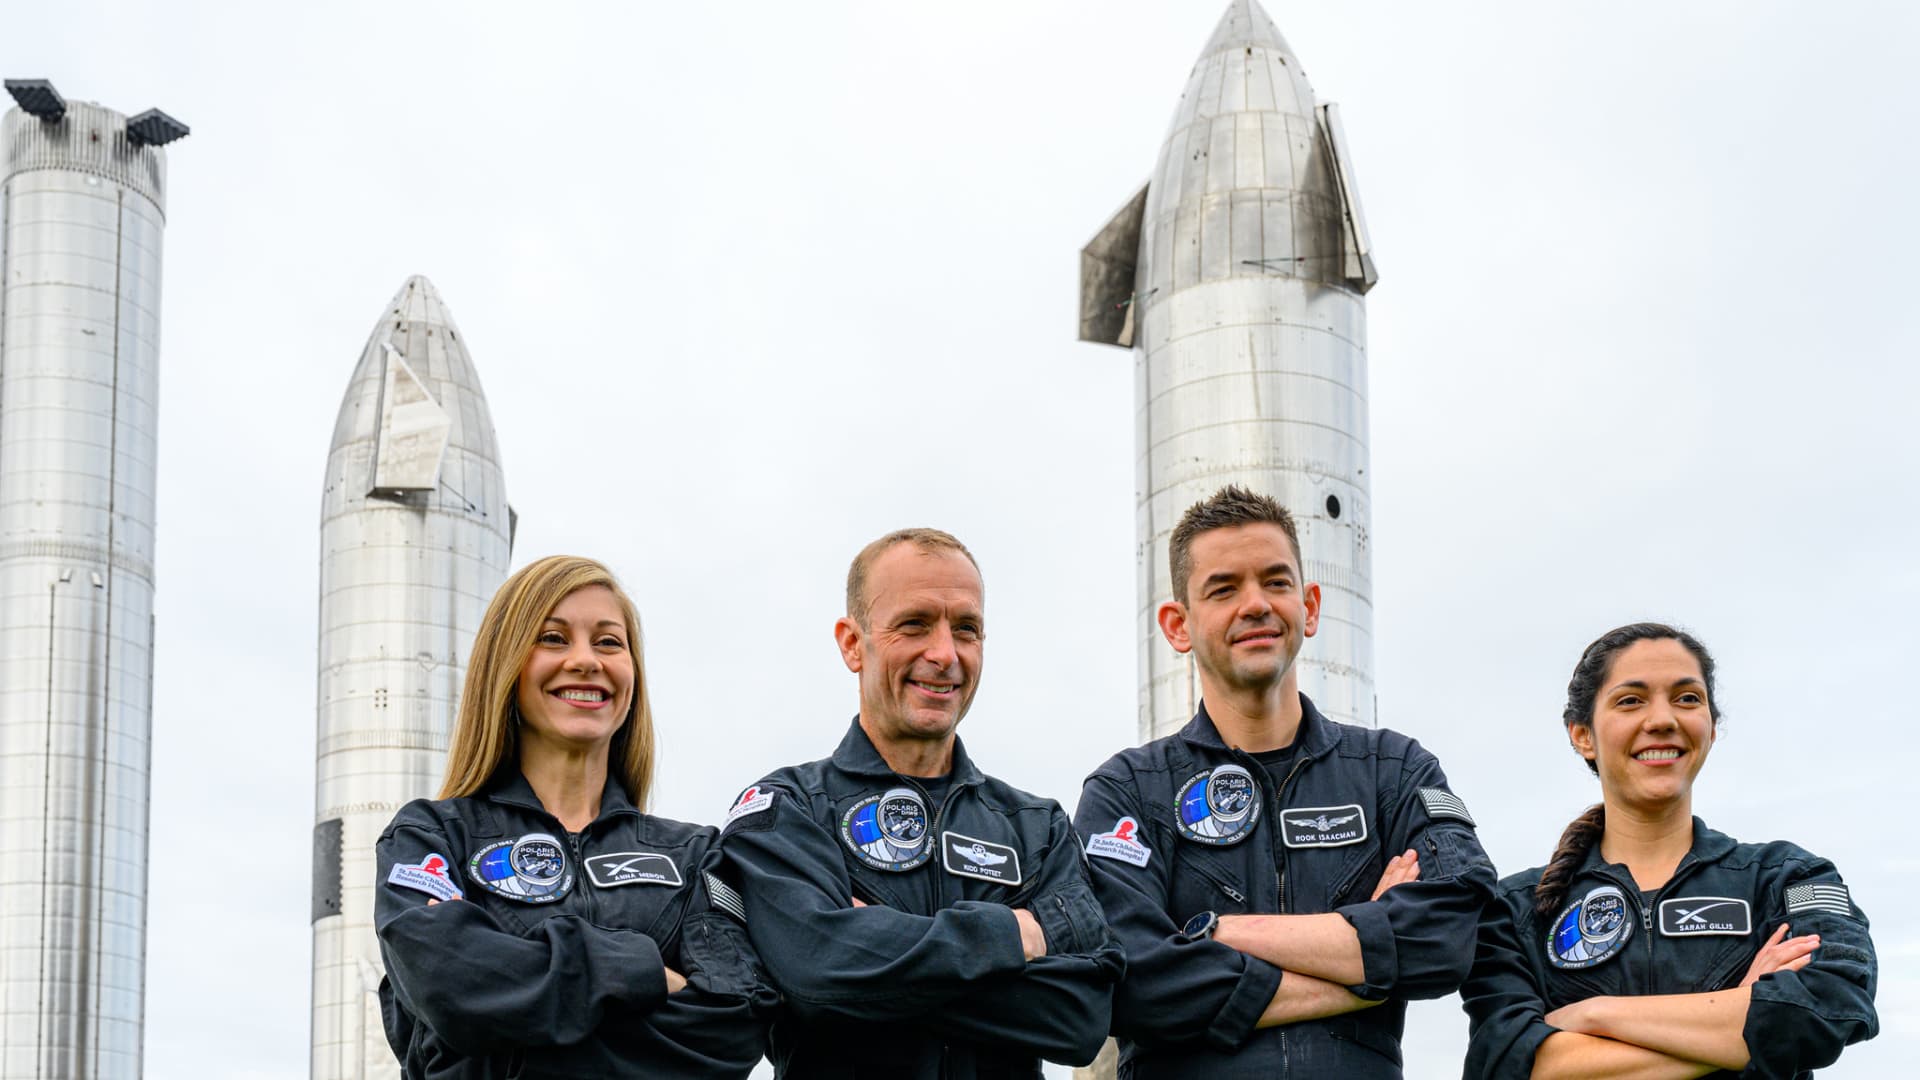 The Polaris Dawn mission crew, from left: Medical officer Anna Menon, pilot Scott Poteet, commander Jared Isaacman, and mission specialist Sarah Gillis.